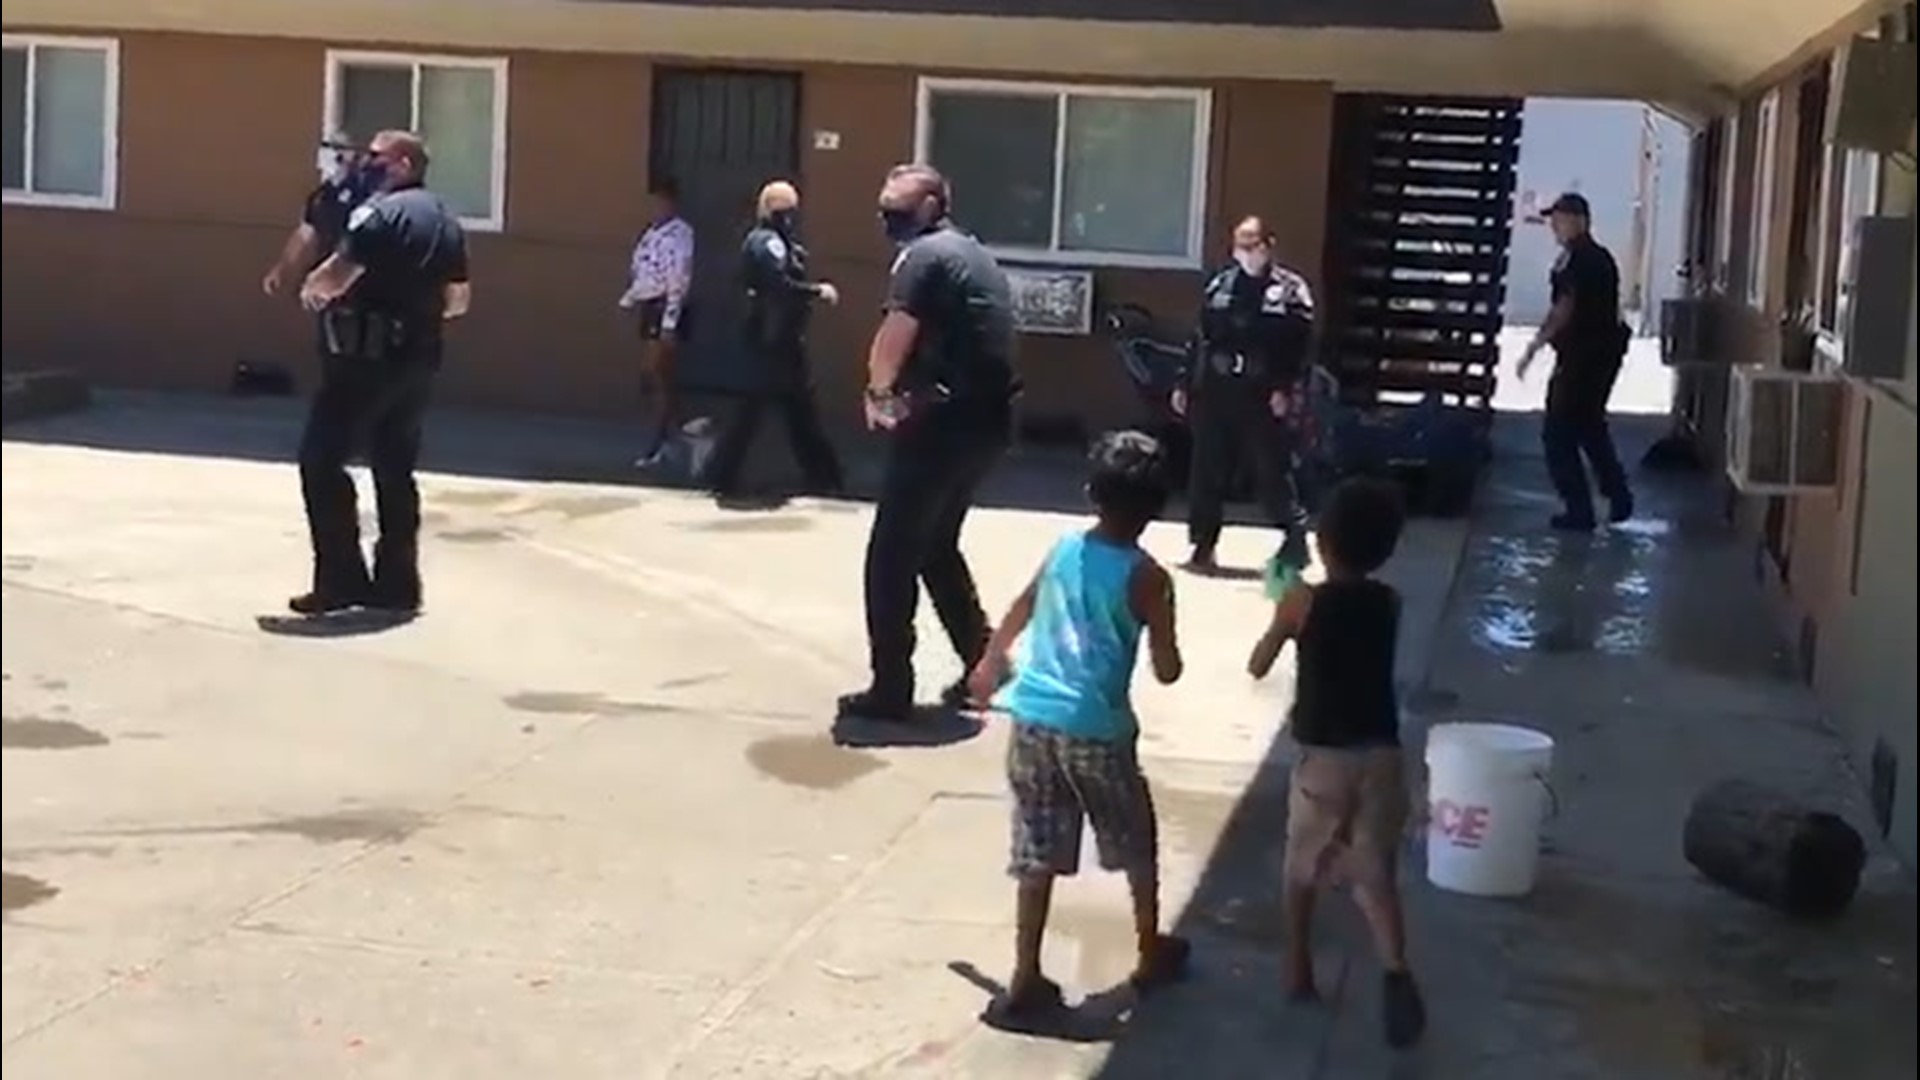 Police officers in Fairfield, California, set up a water fight for kids playing outside to stay cool on June 23. The pools were closed due to COVID-19.